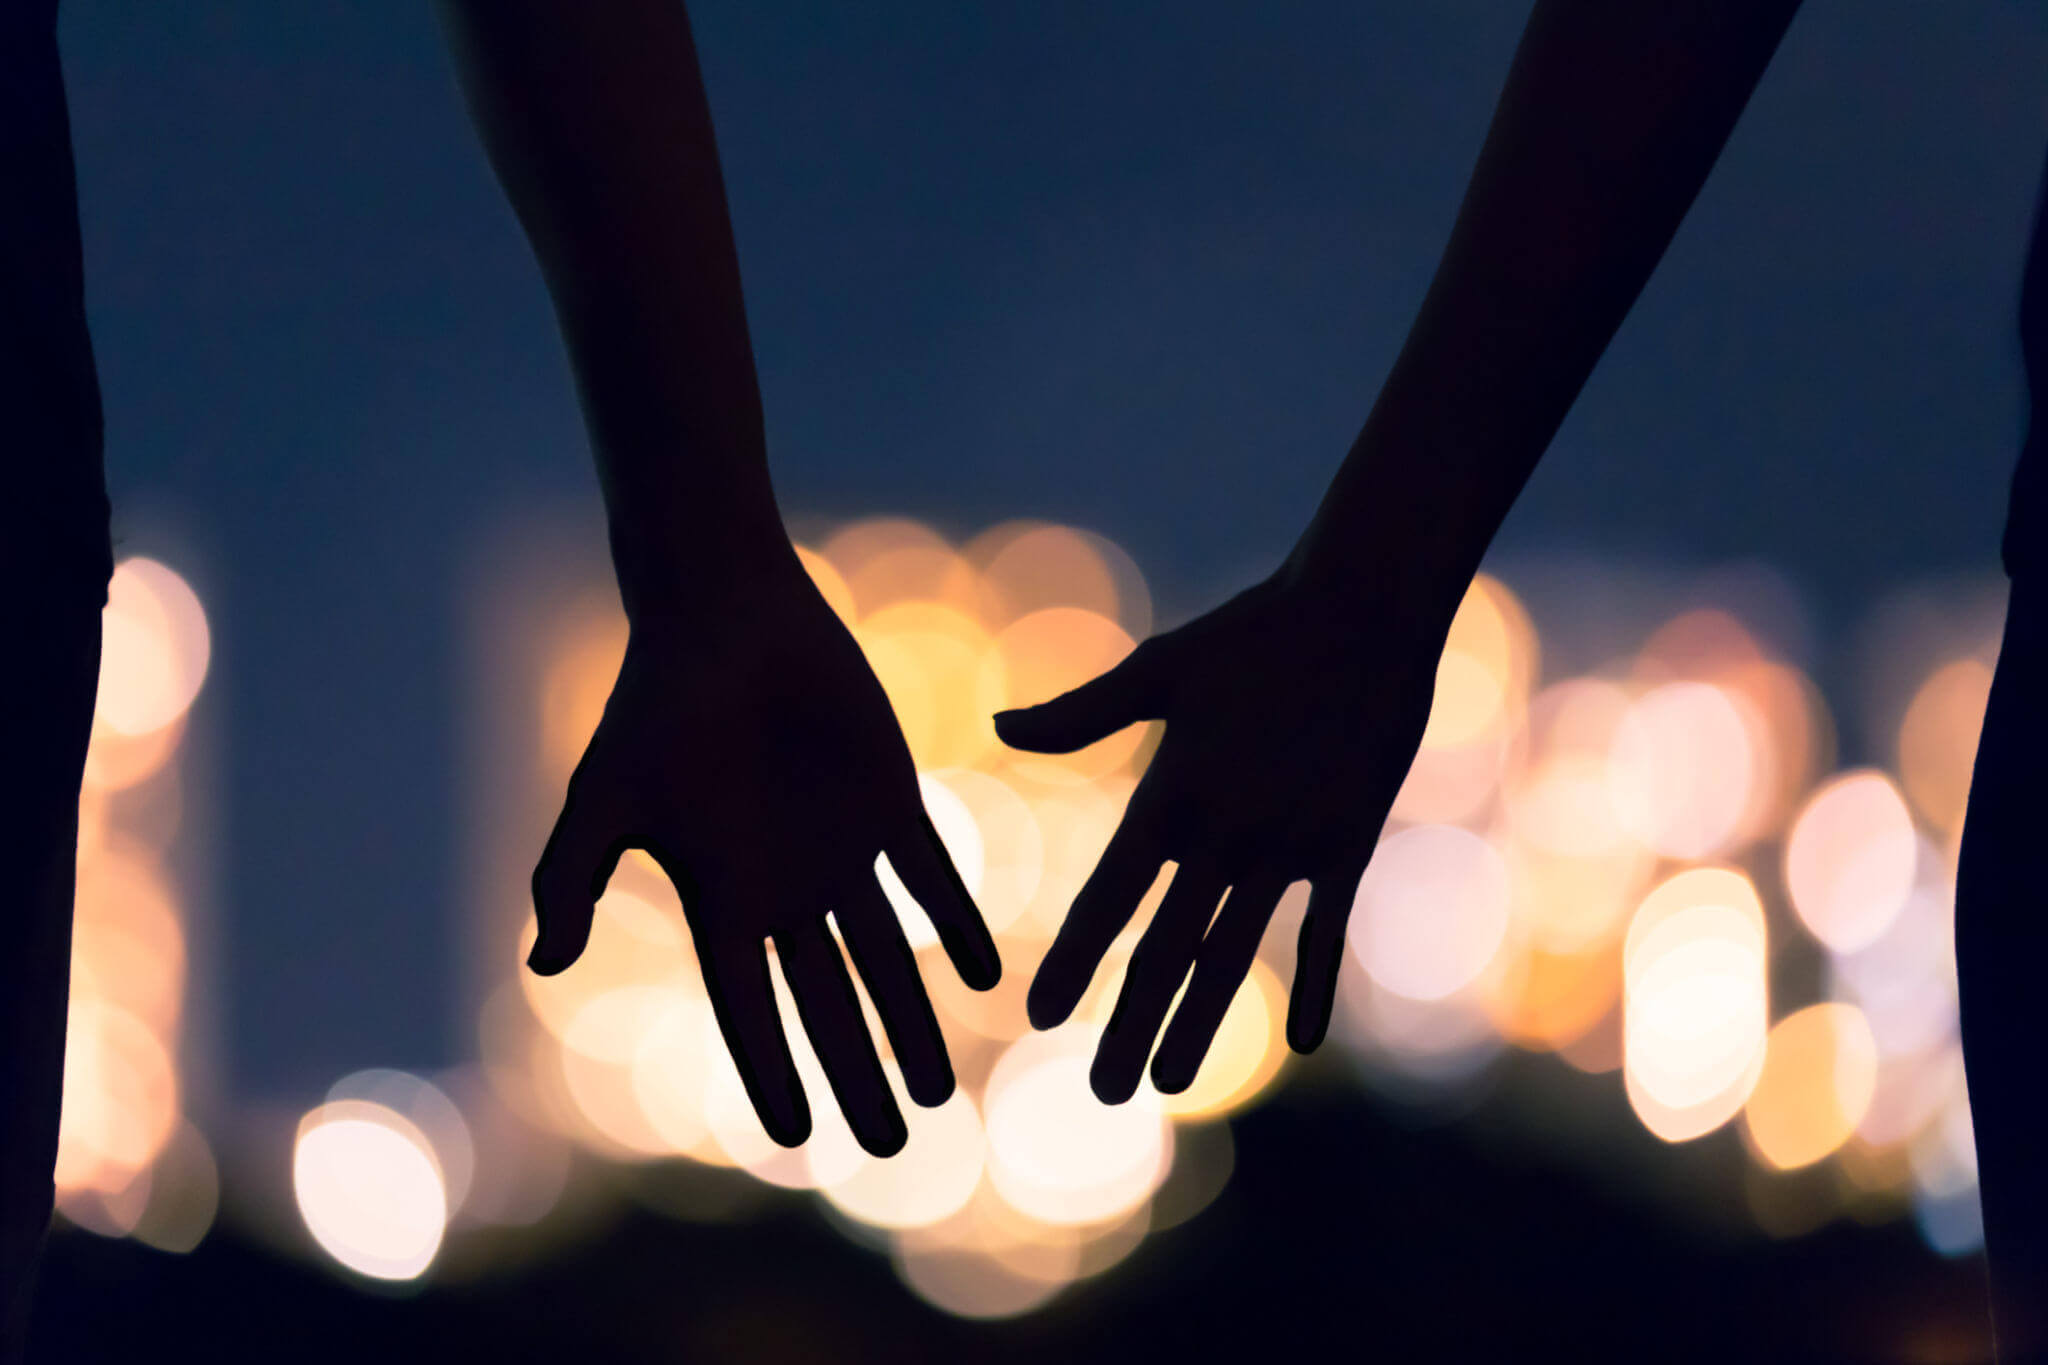 Photo of two hands reaching out to each other at night. Struggling to repair your relationship after an affair? With affair recovery in Florida you can begin learning to trust your partner and heal your relationship.